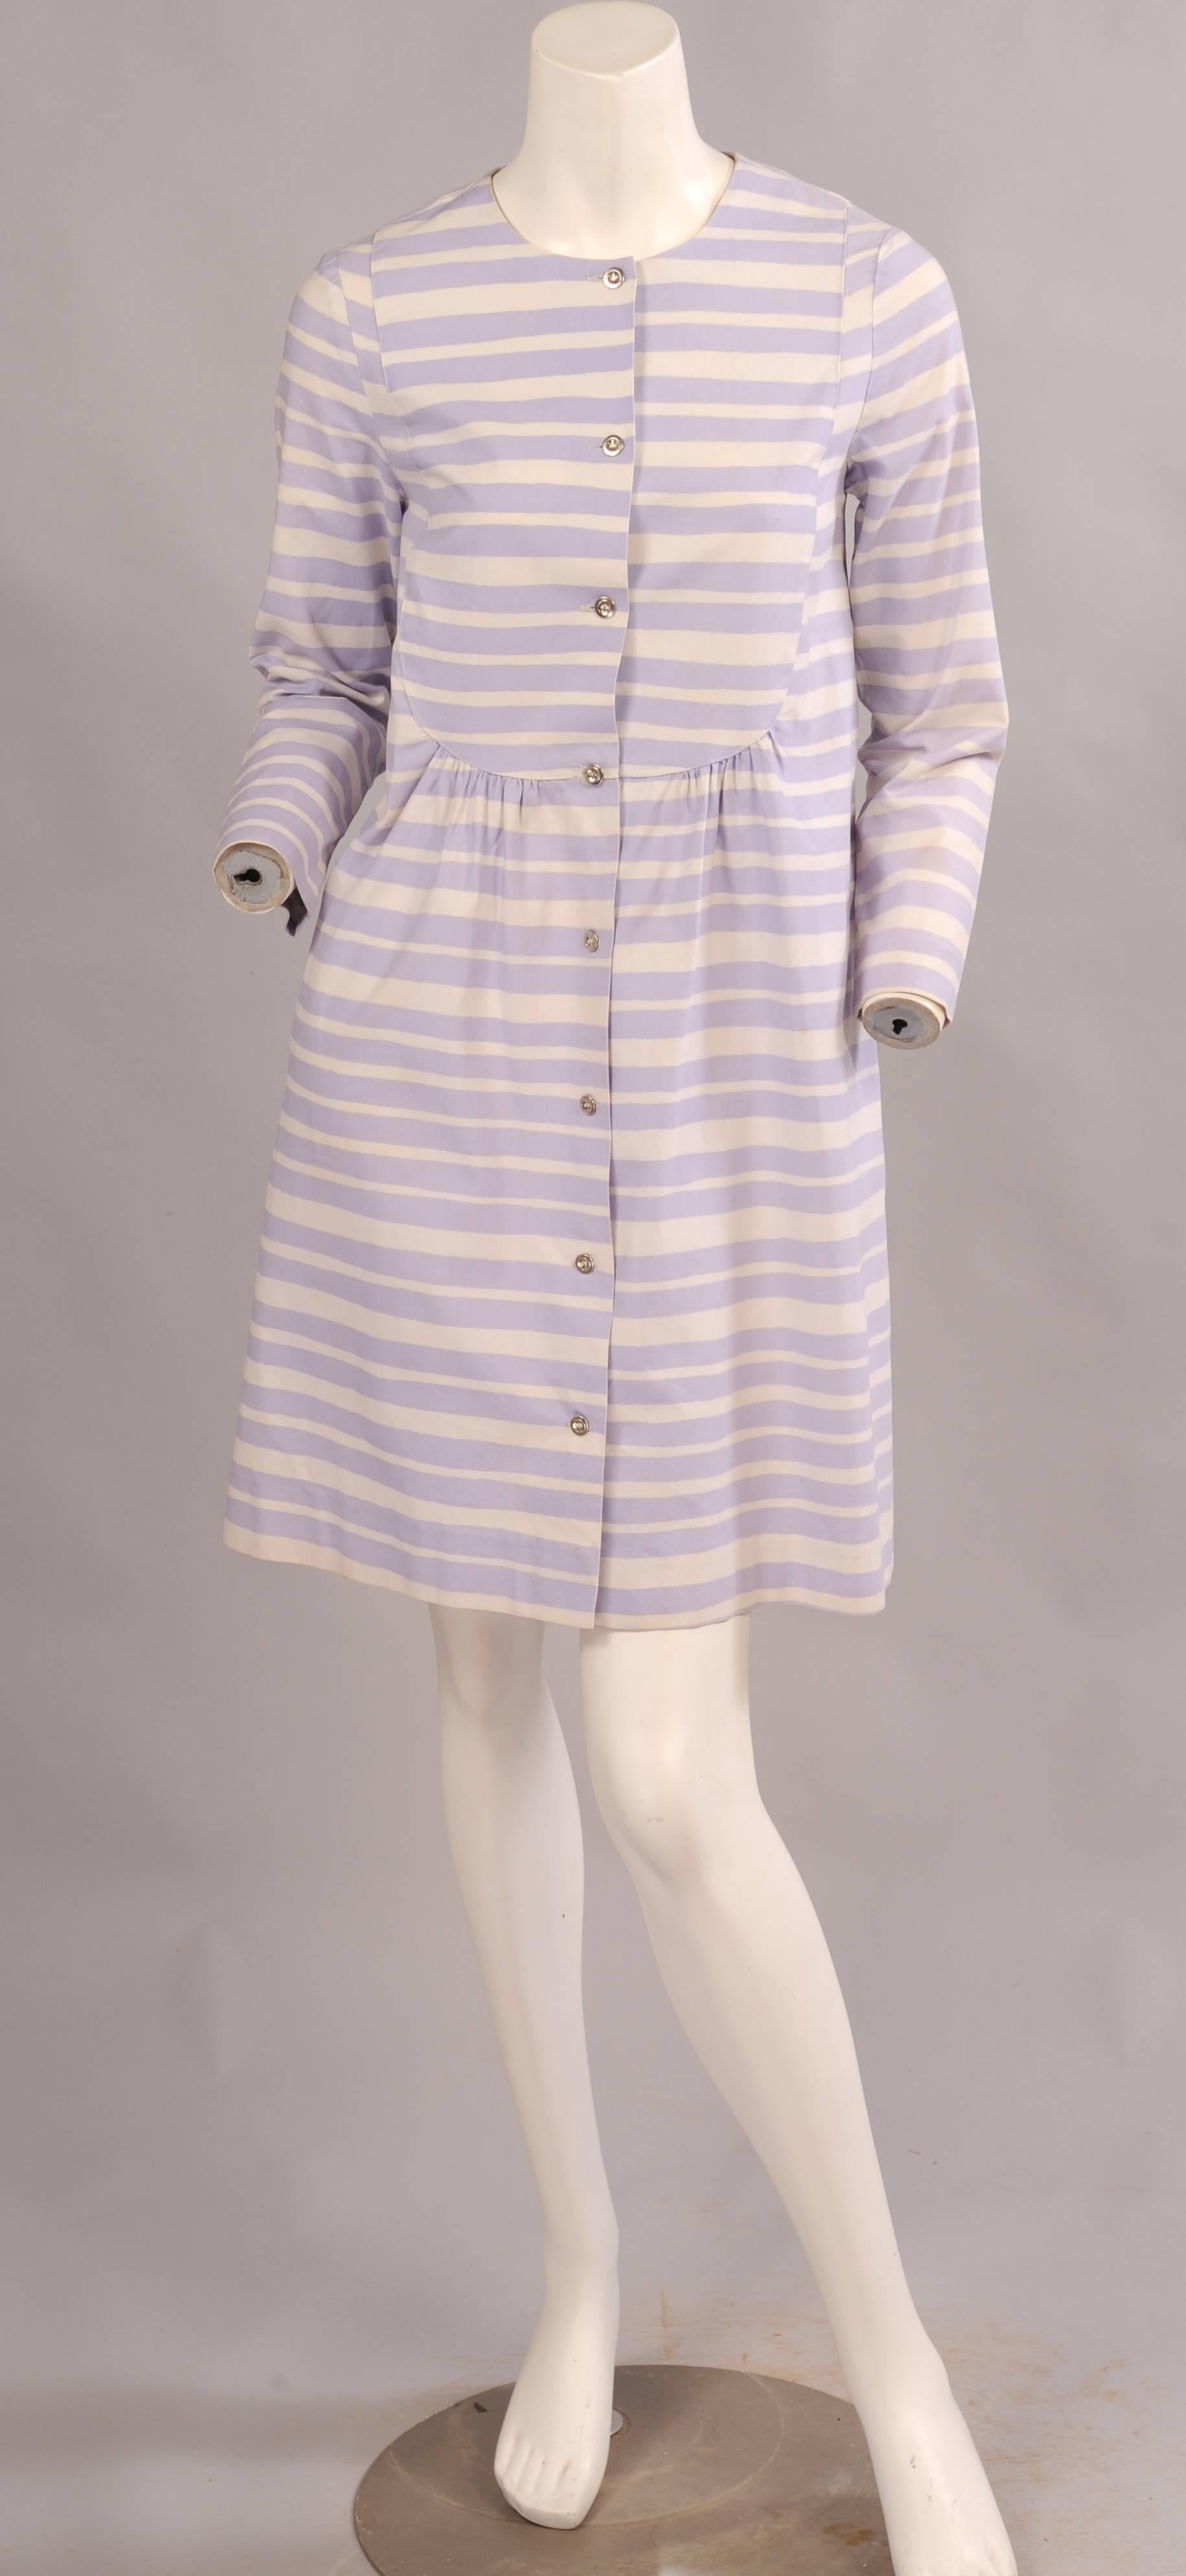 Design Research in Cambridge, Massachusetts introduced Marimekko fabrics and clothing to the United States in the late 1950's. This dress dated 1966 is designed in the Piccolo pattern in lavender and white irregular stripes. It has a bib front and